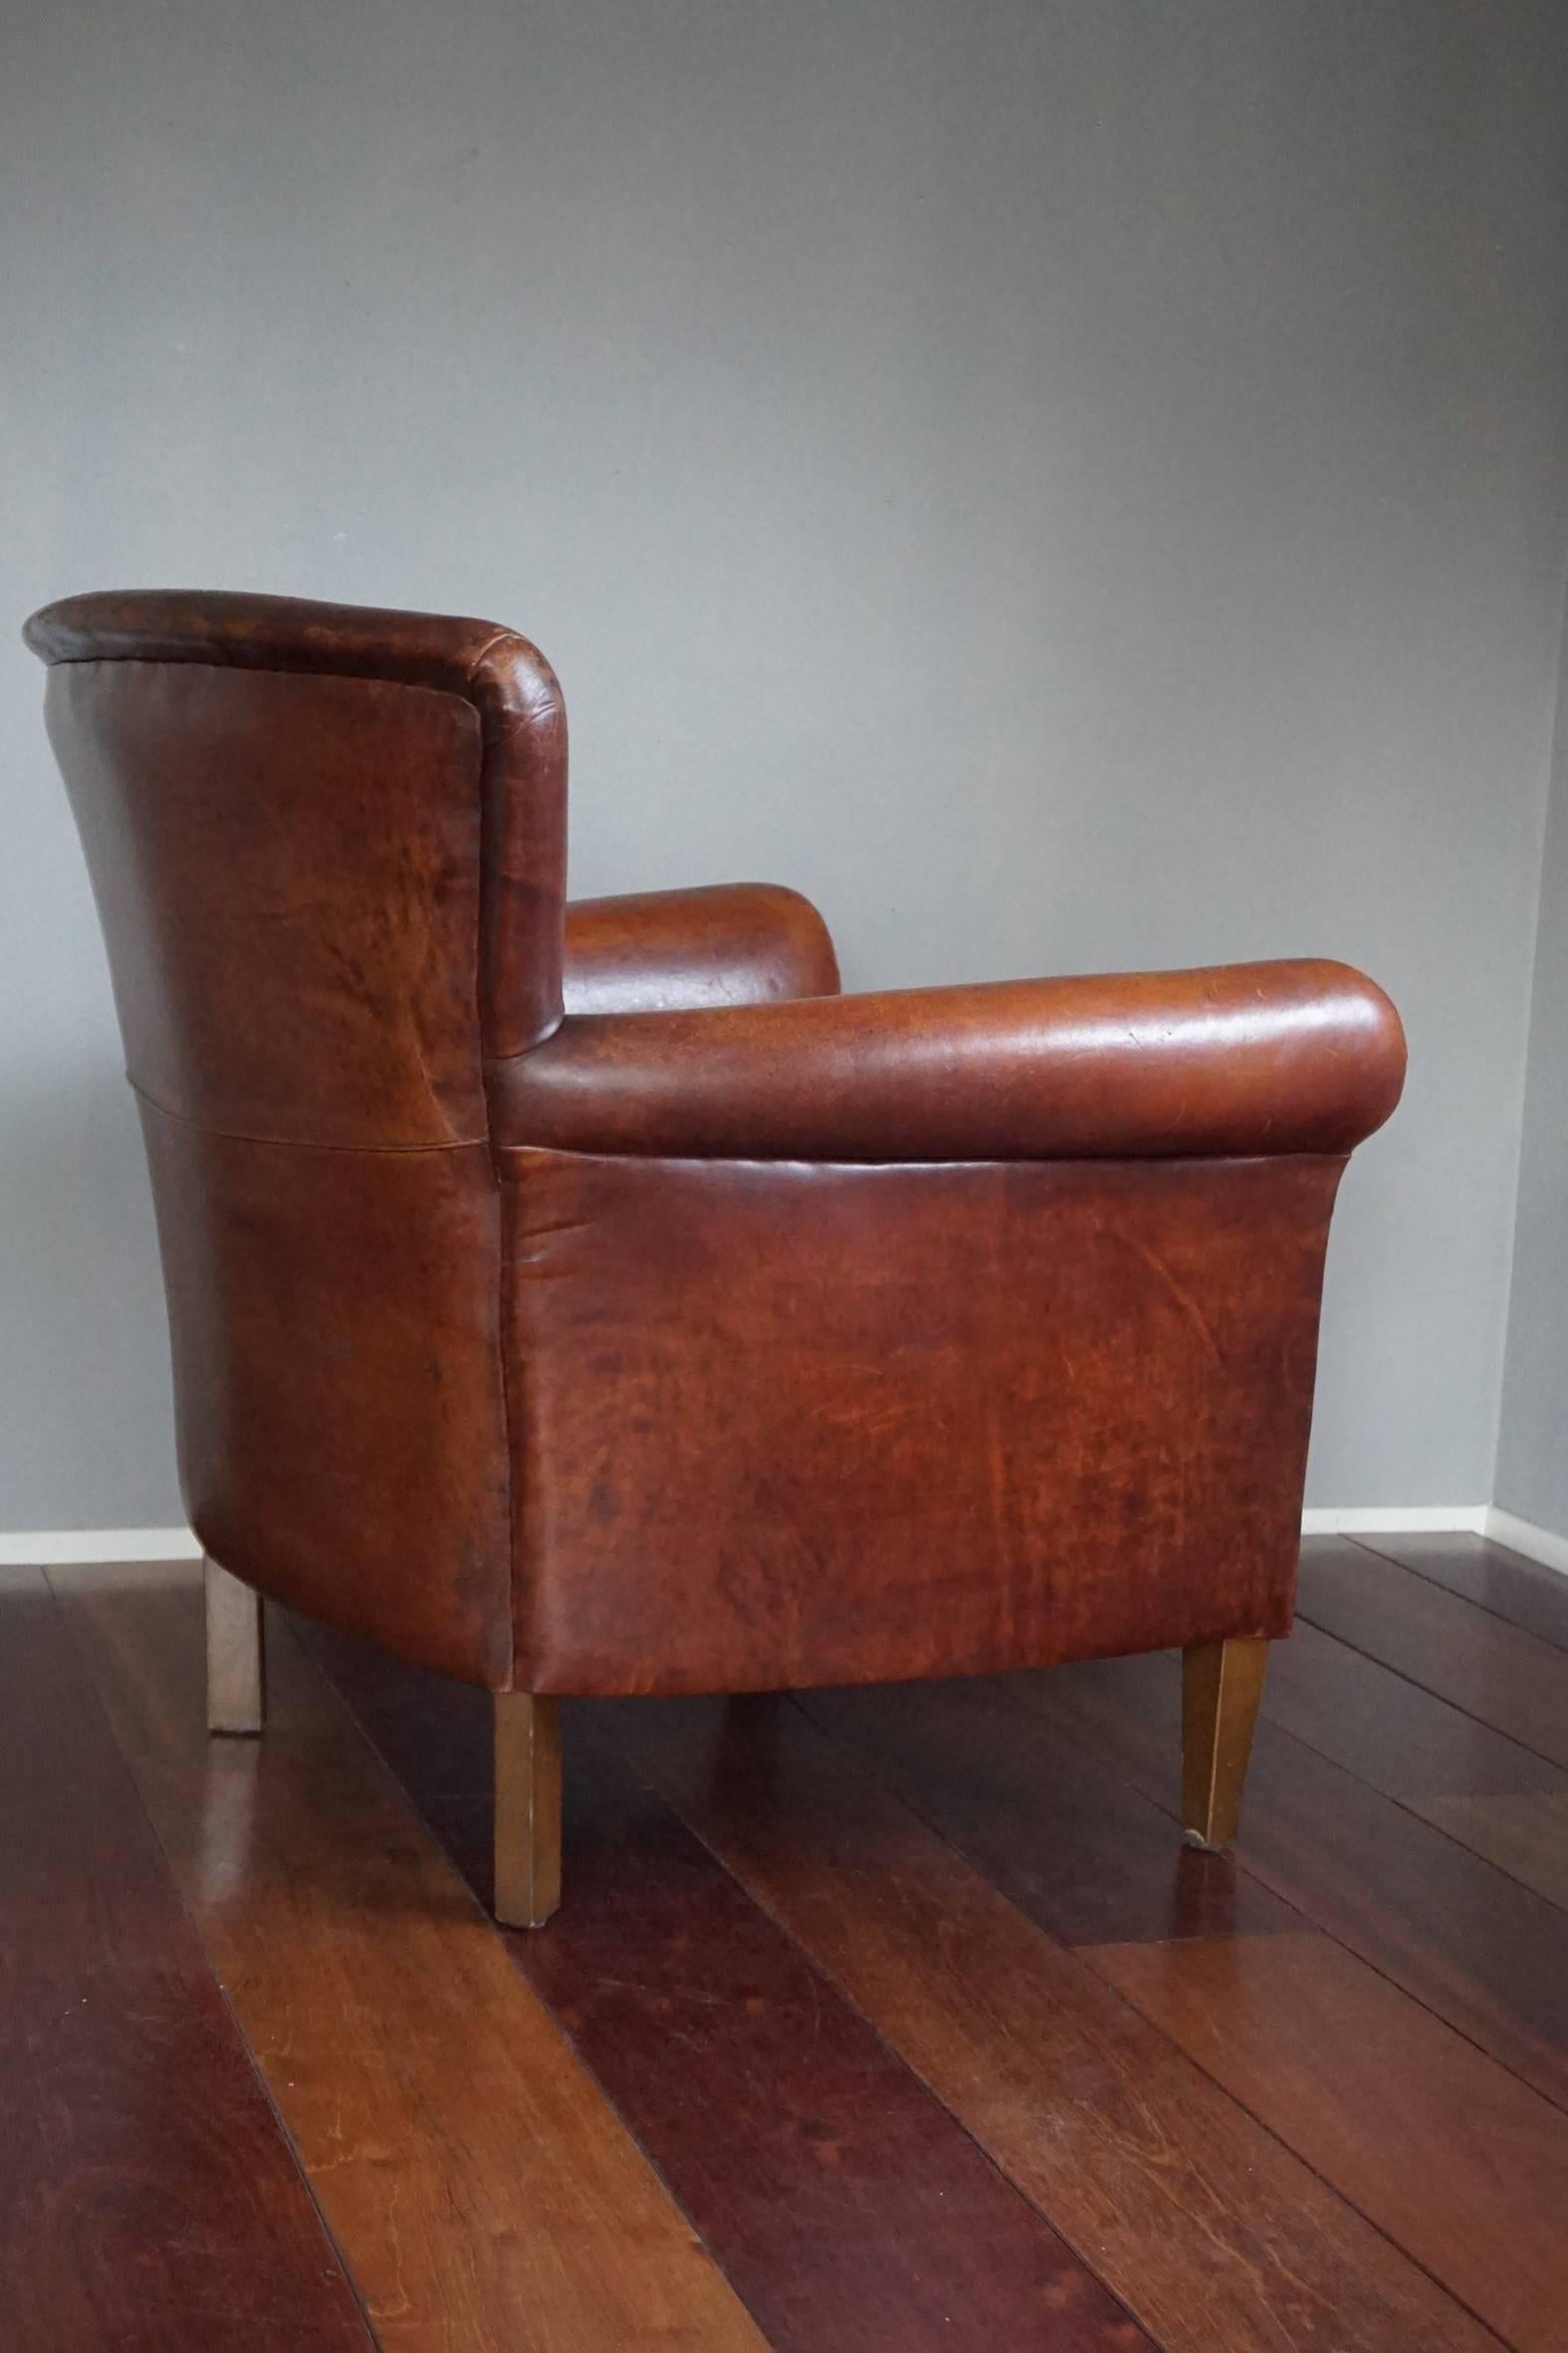 Late 20th Century Great Quality and Condition Sheep Leather & Wood Chair Armchair with Warm Patina